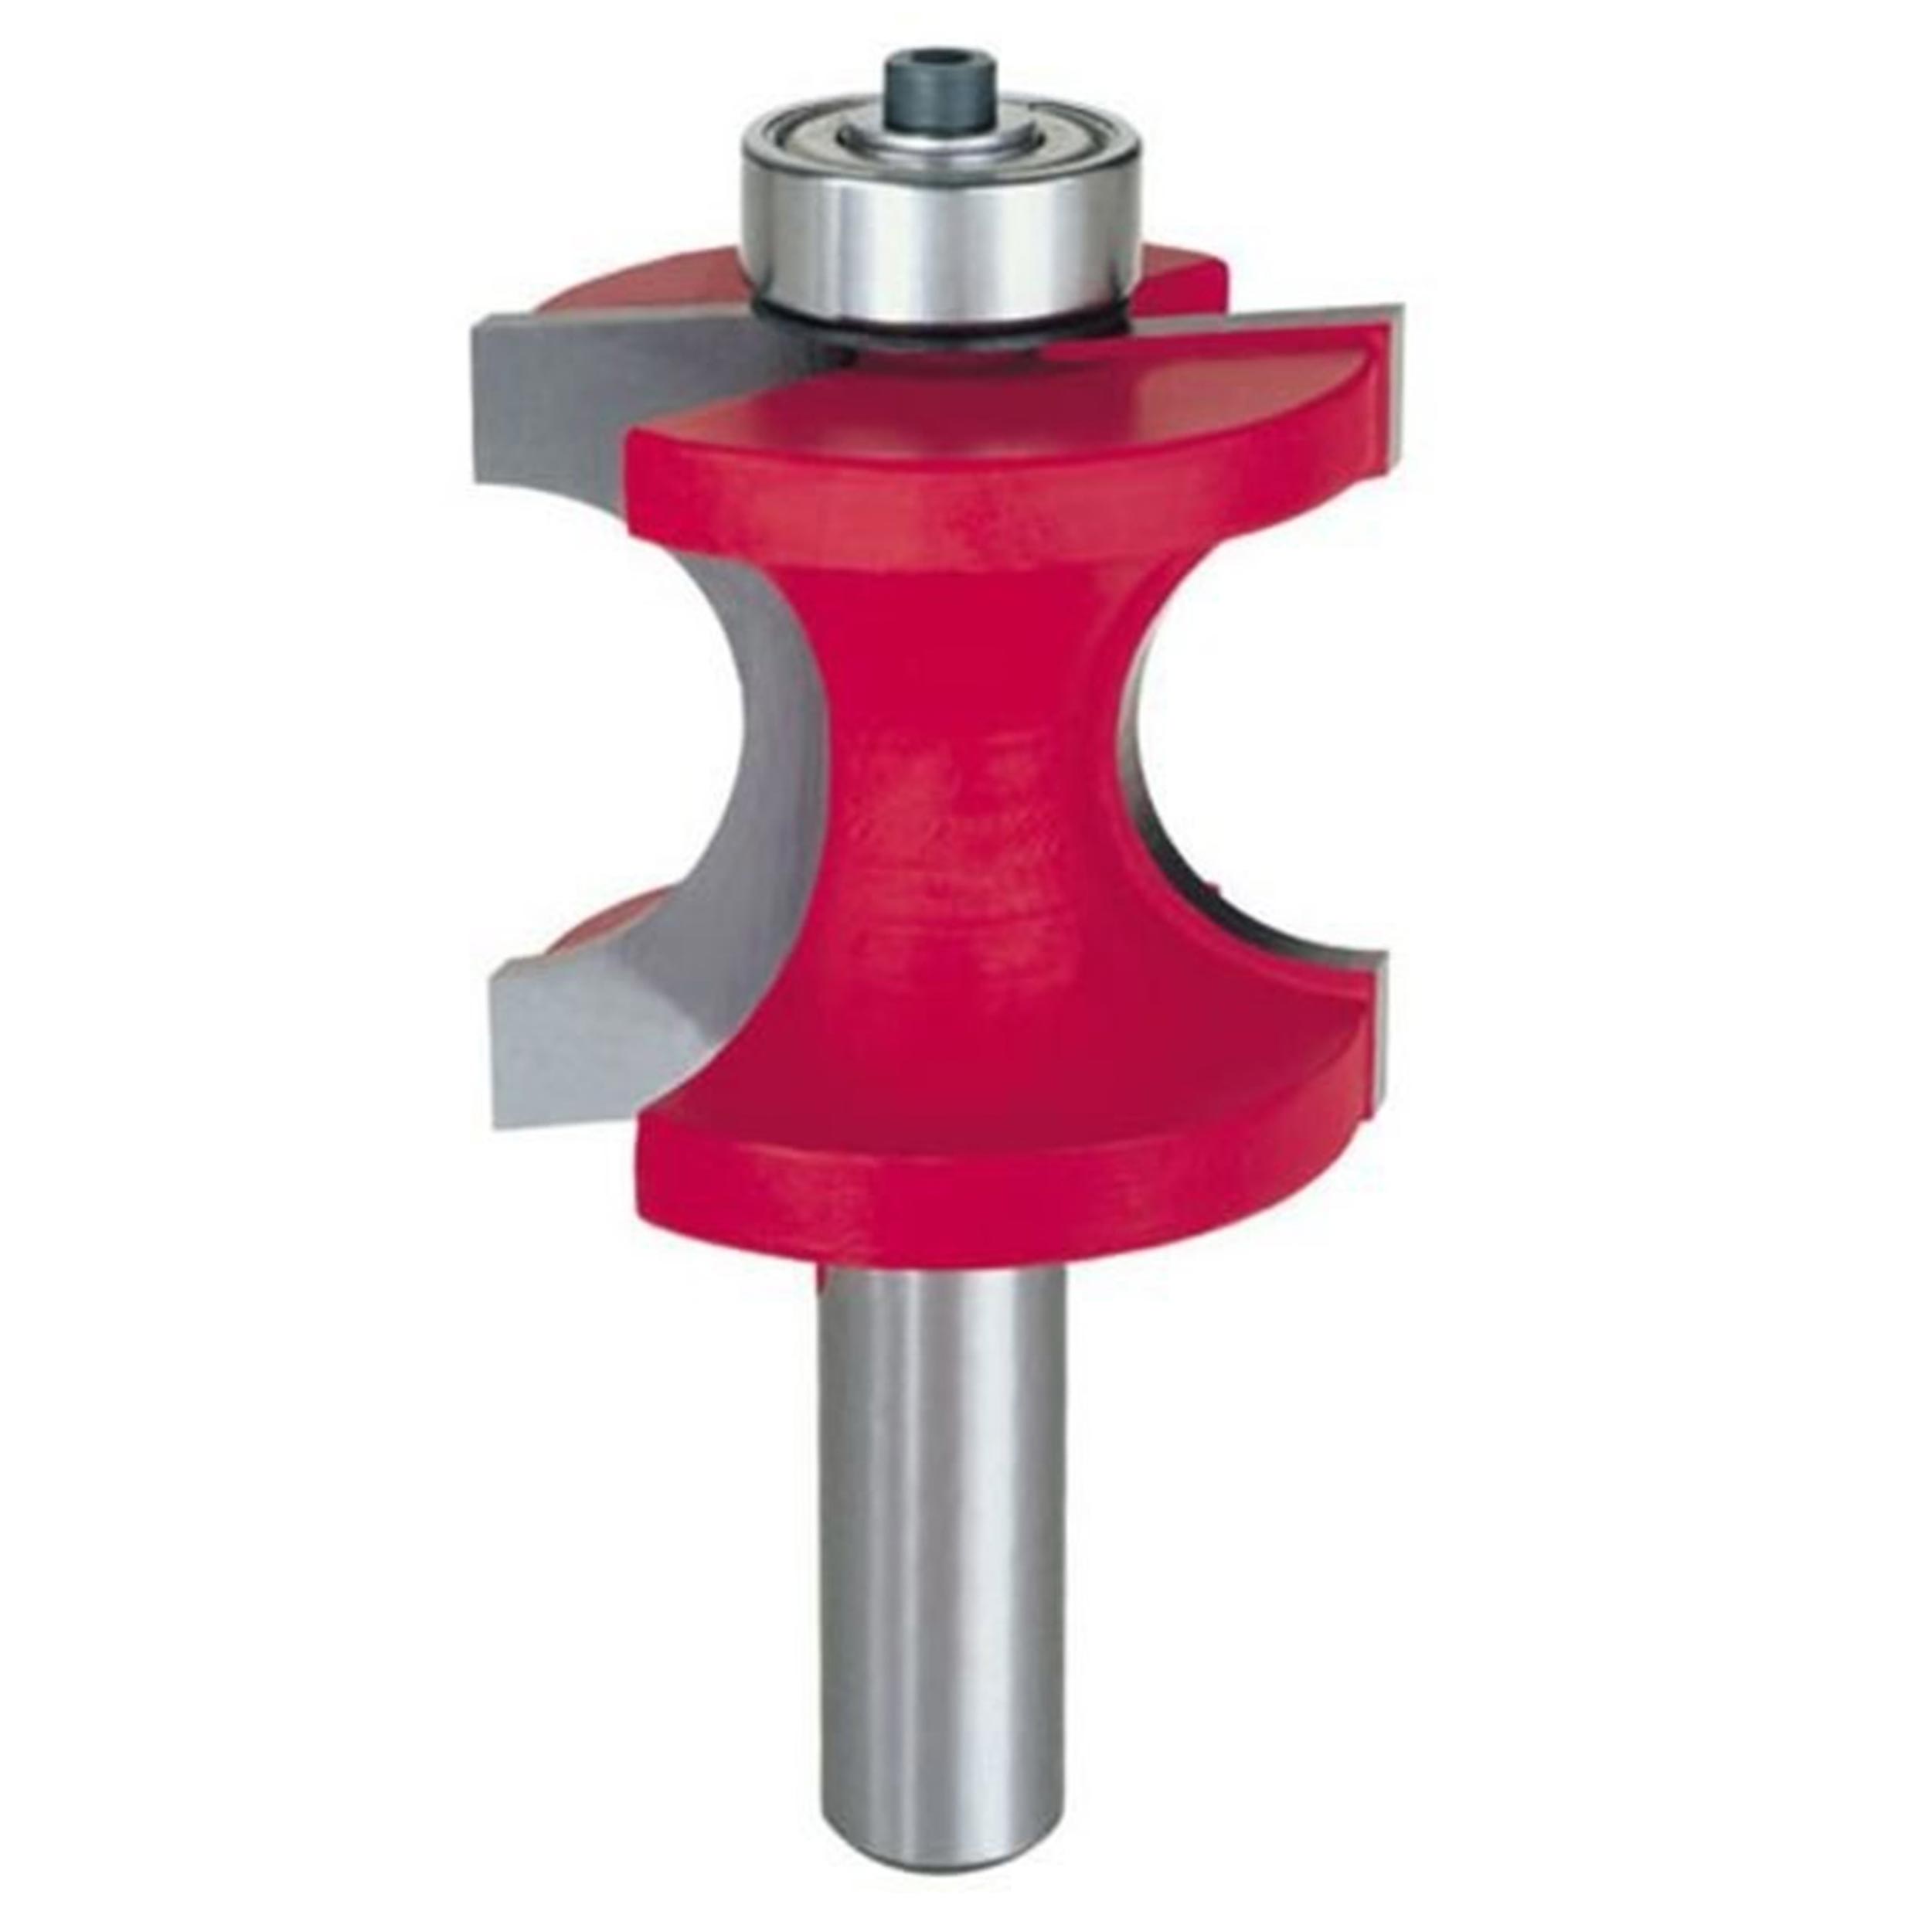 82-514 Half Round Router Bit With Bearing 1/2" Shank 1/2" R 1-19/32" Cl